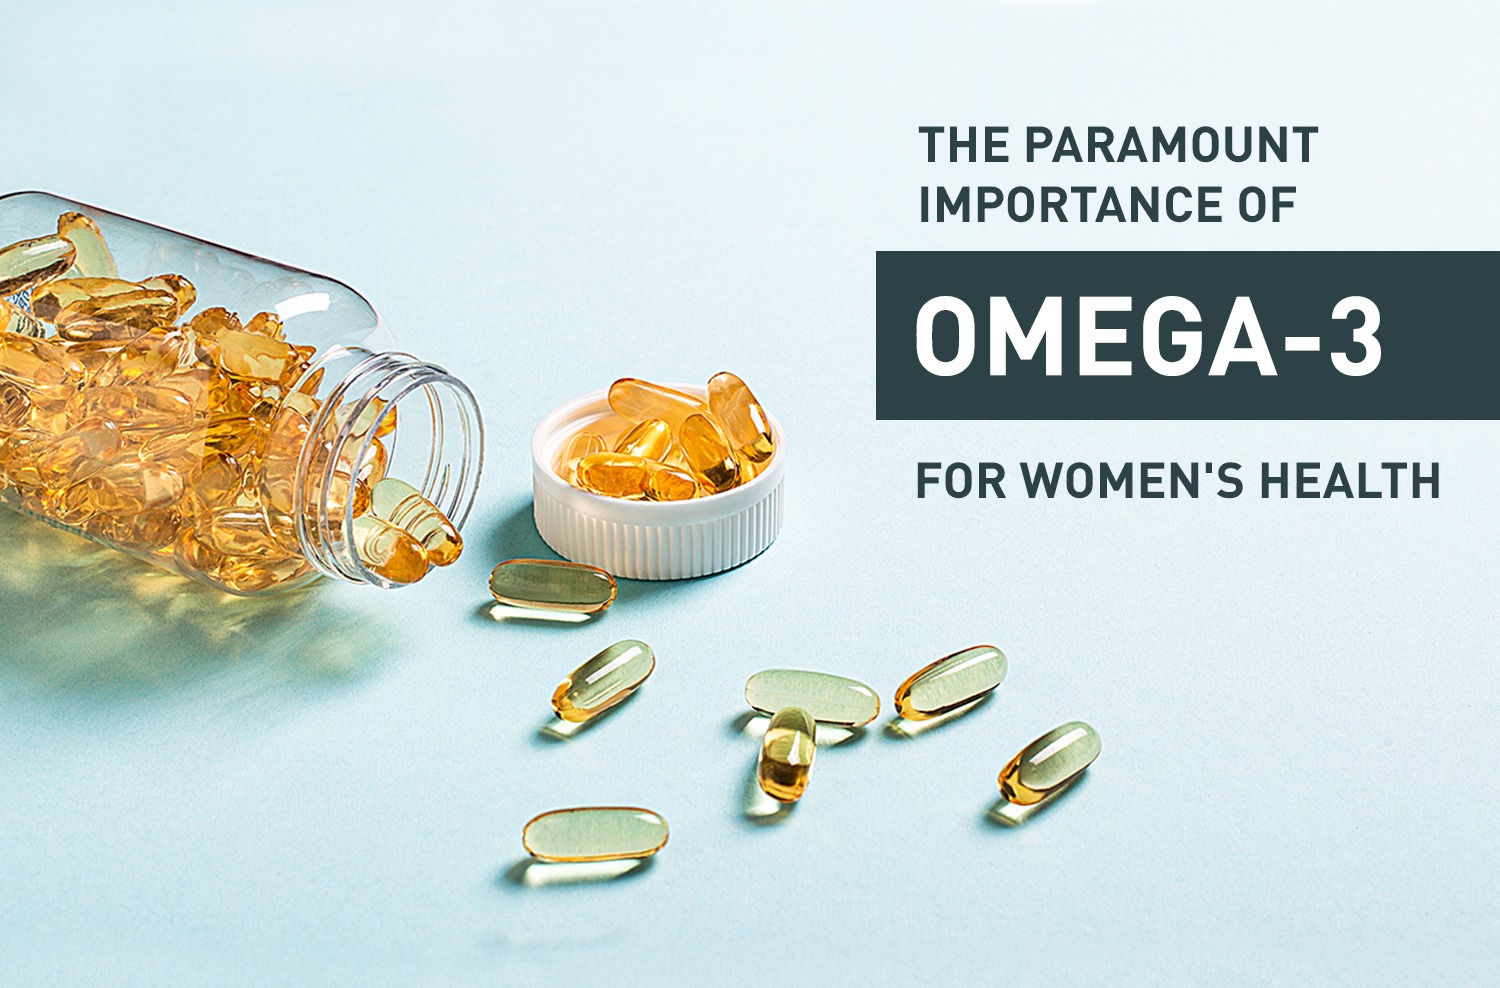 Importance of Omega-3 for Women's Health